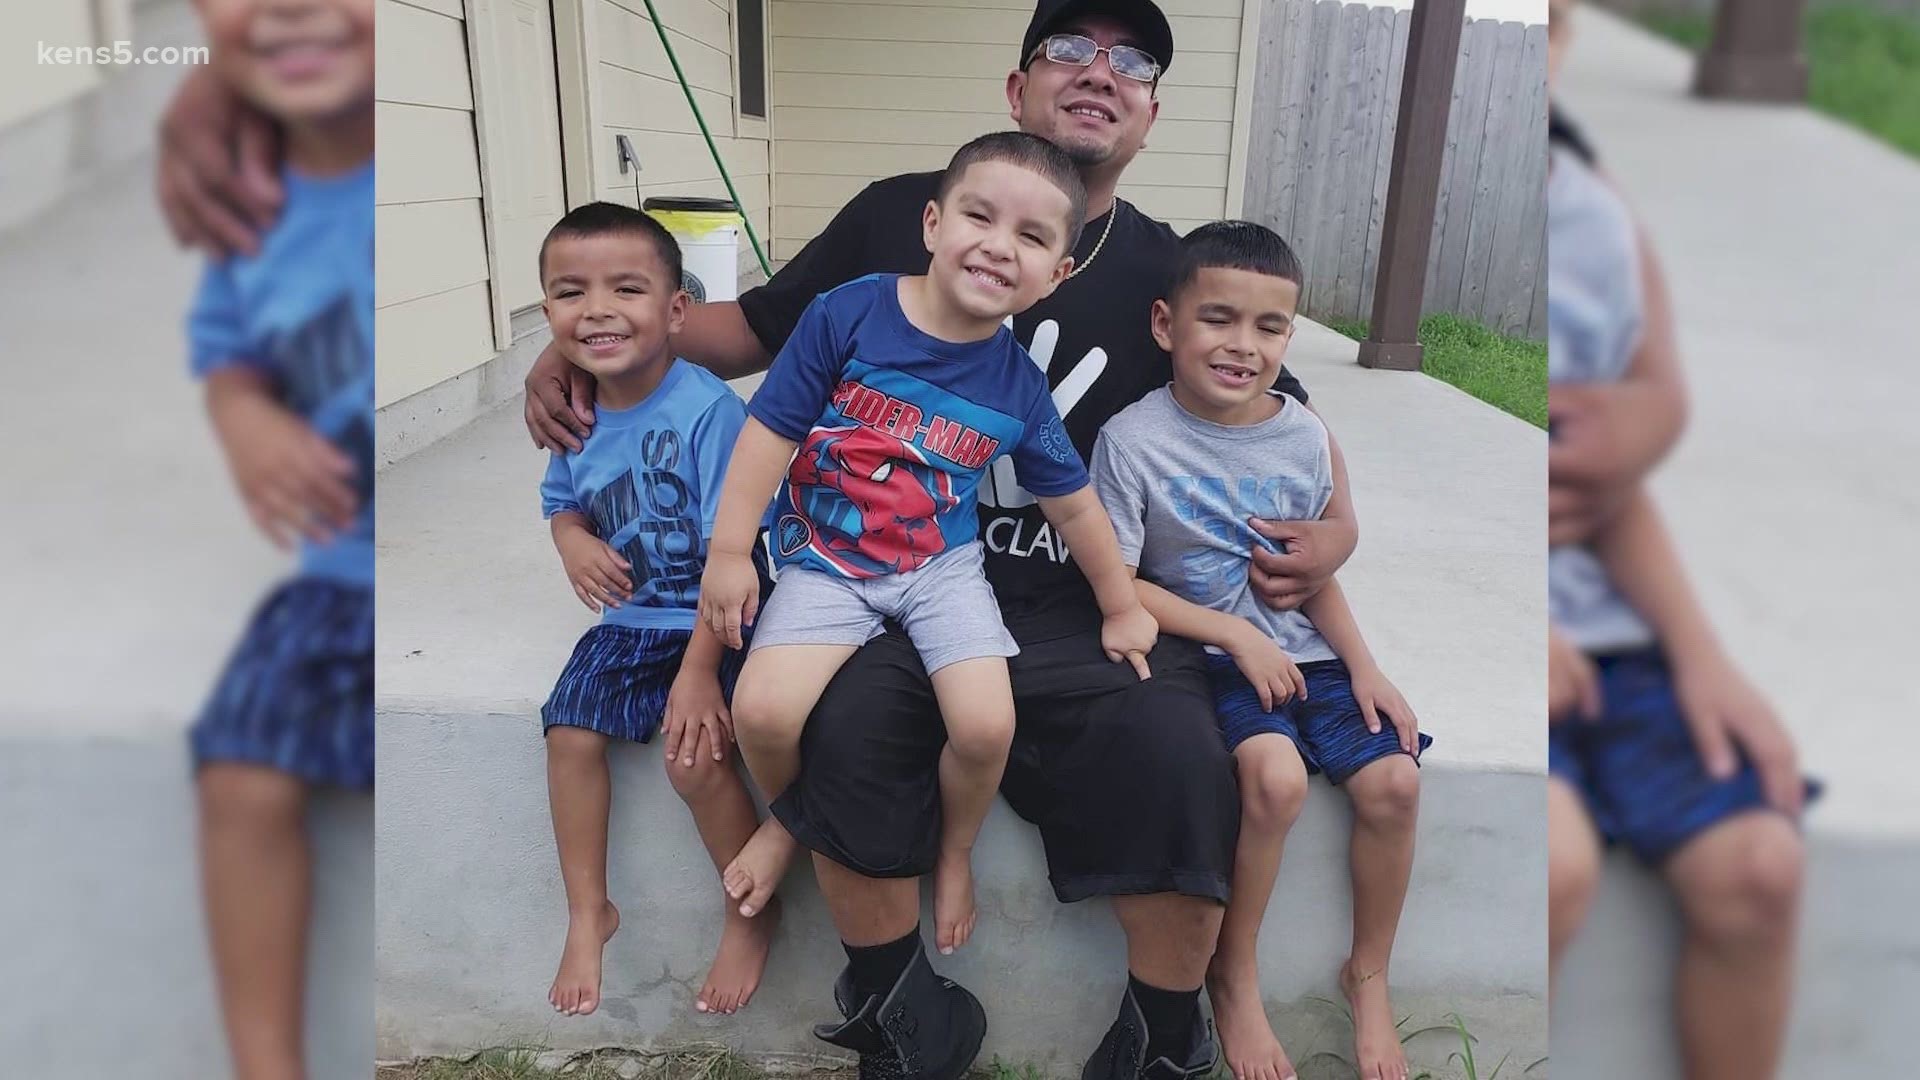 Victor Villanueva passed away saving his children from drowning. Now, his wife is speaking to KENS 5 about her husband's heroic actions.